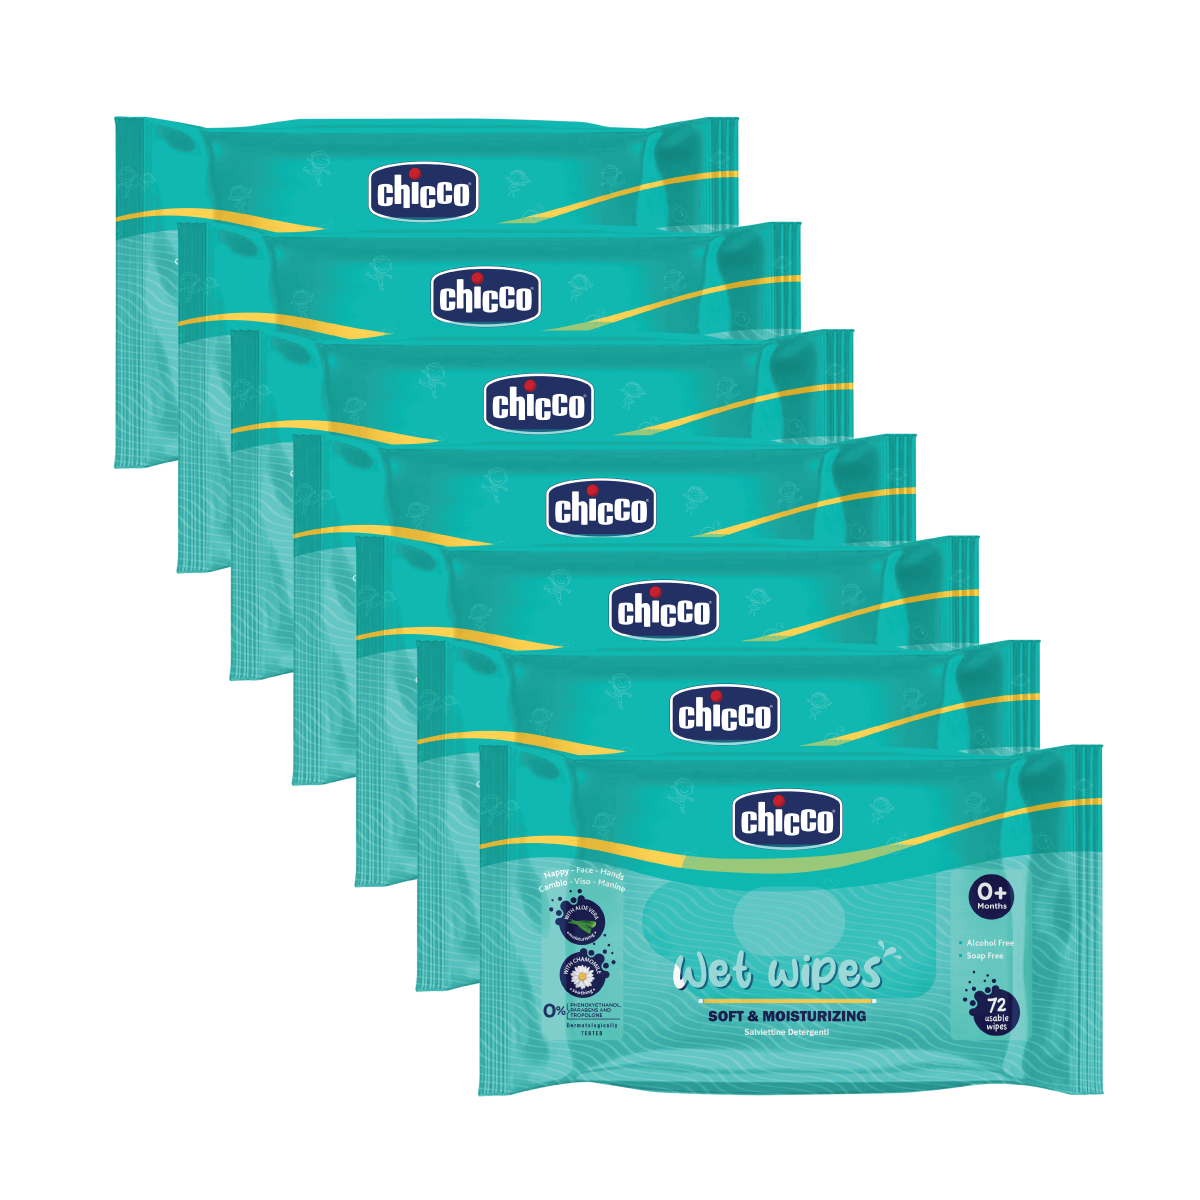 Chicco Wetwipes Pack of 3-504 PCS